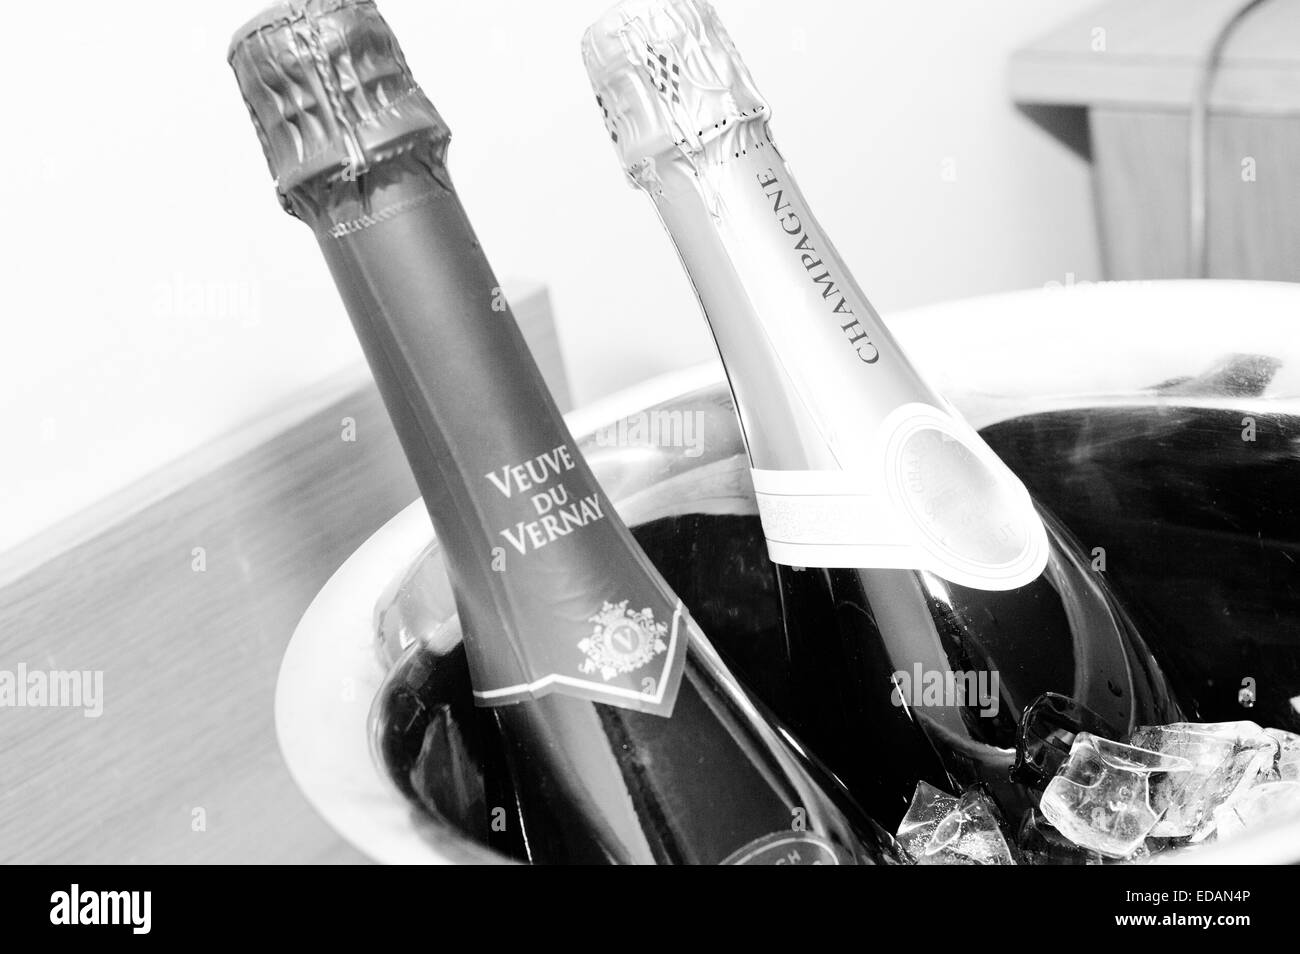 two champagne bottles on ice Stock Photo